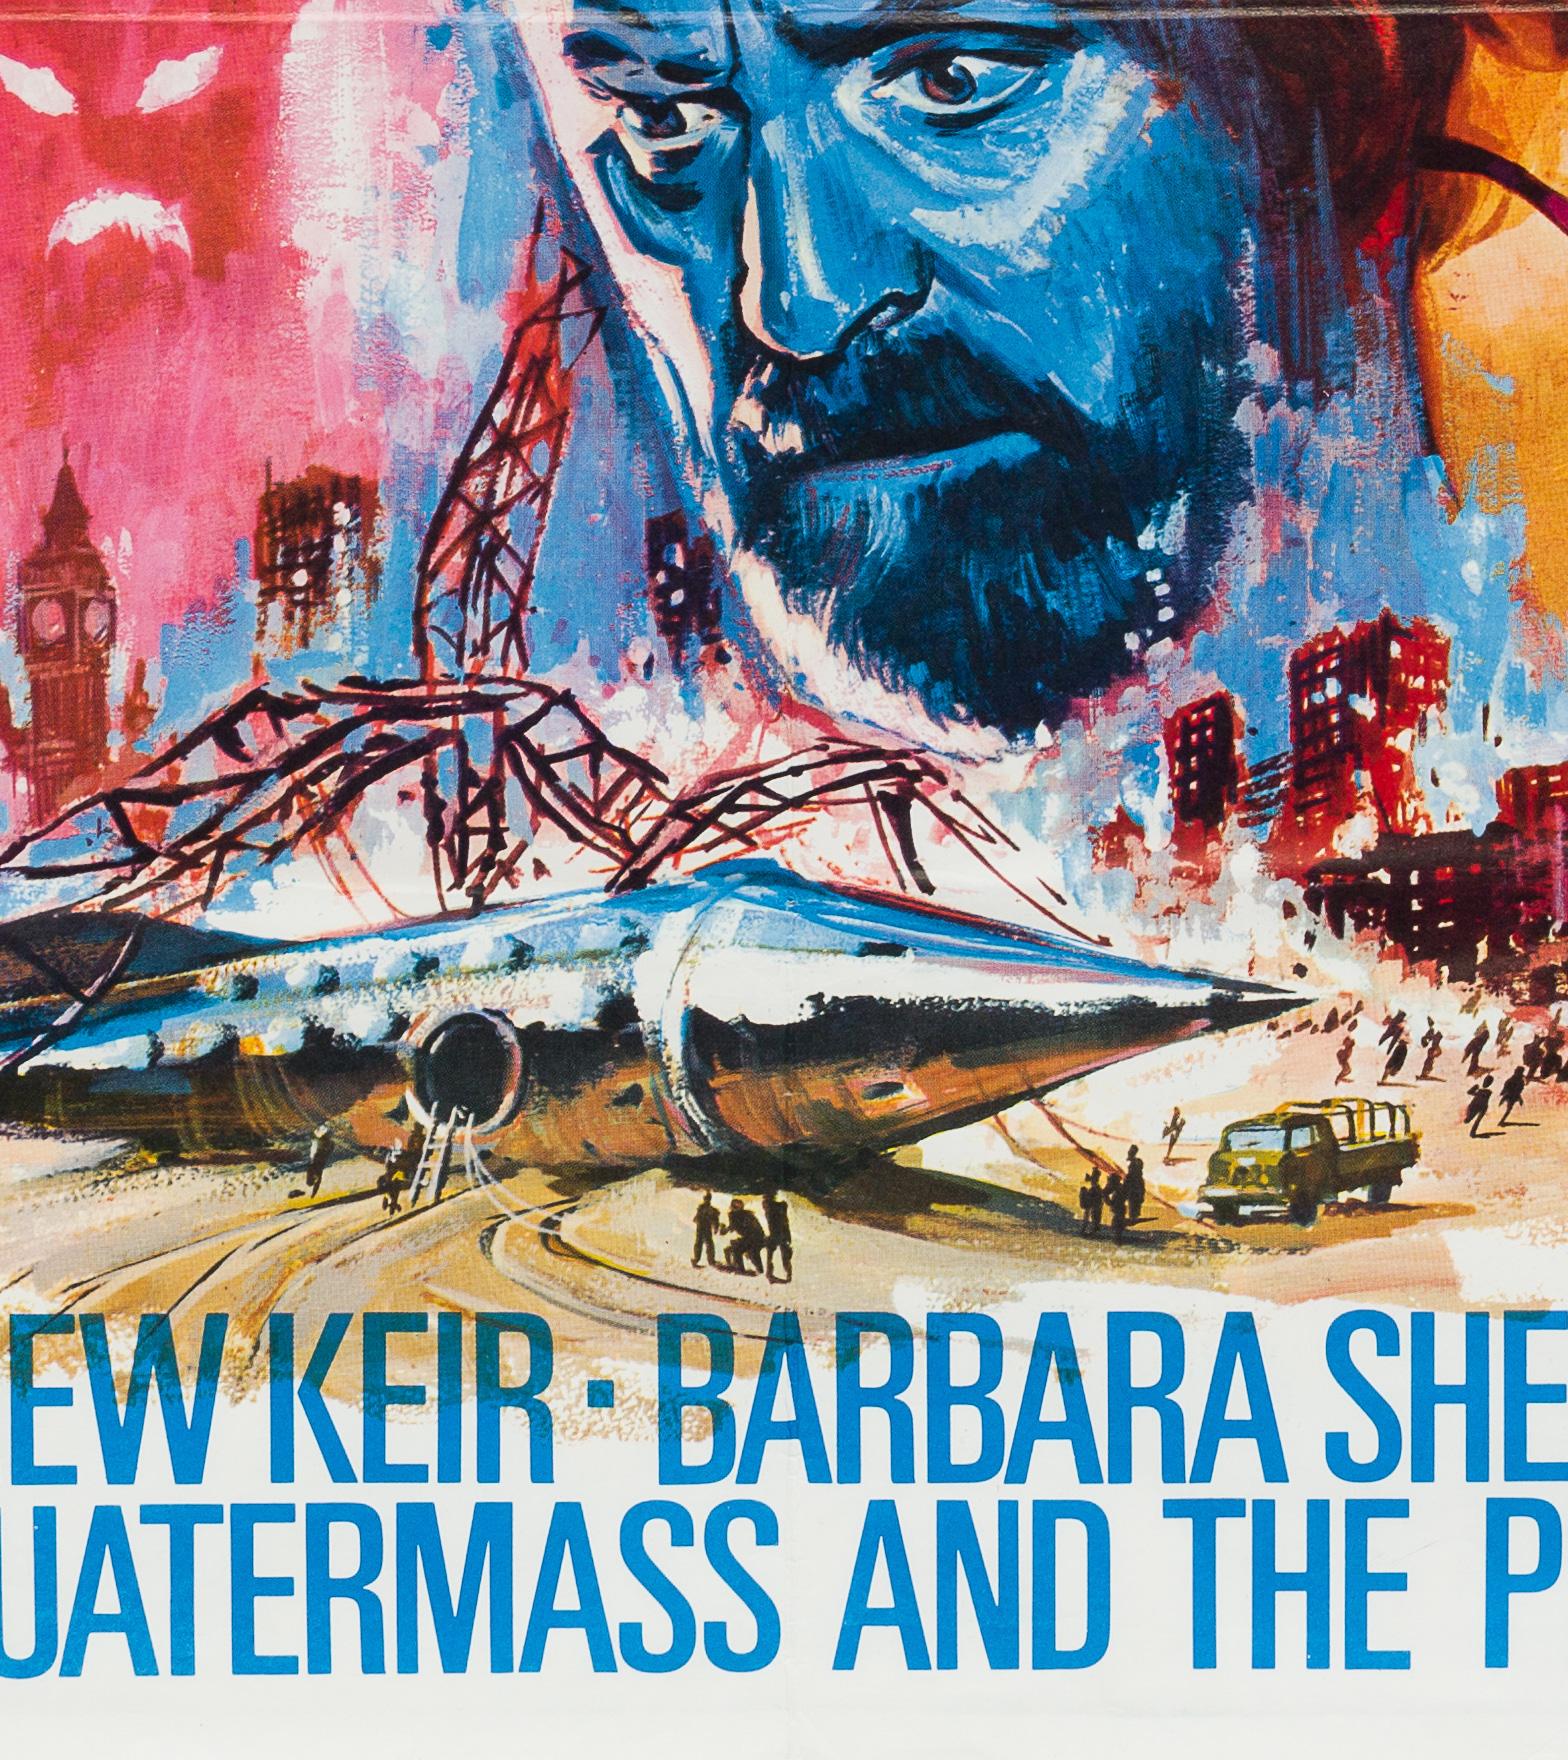 Quatermass and the Pit Original UK Film Poster, Tom Chantrell, 1967 In Excellent Condition In Bath, Somerset